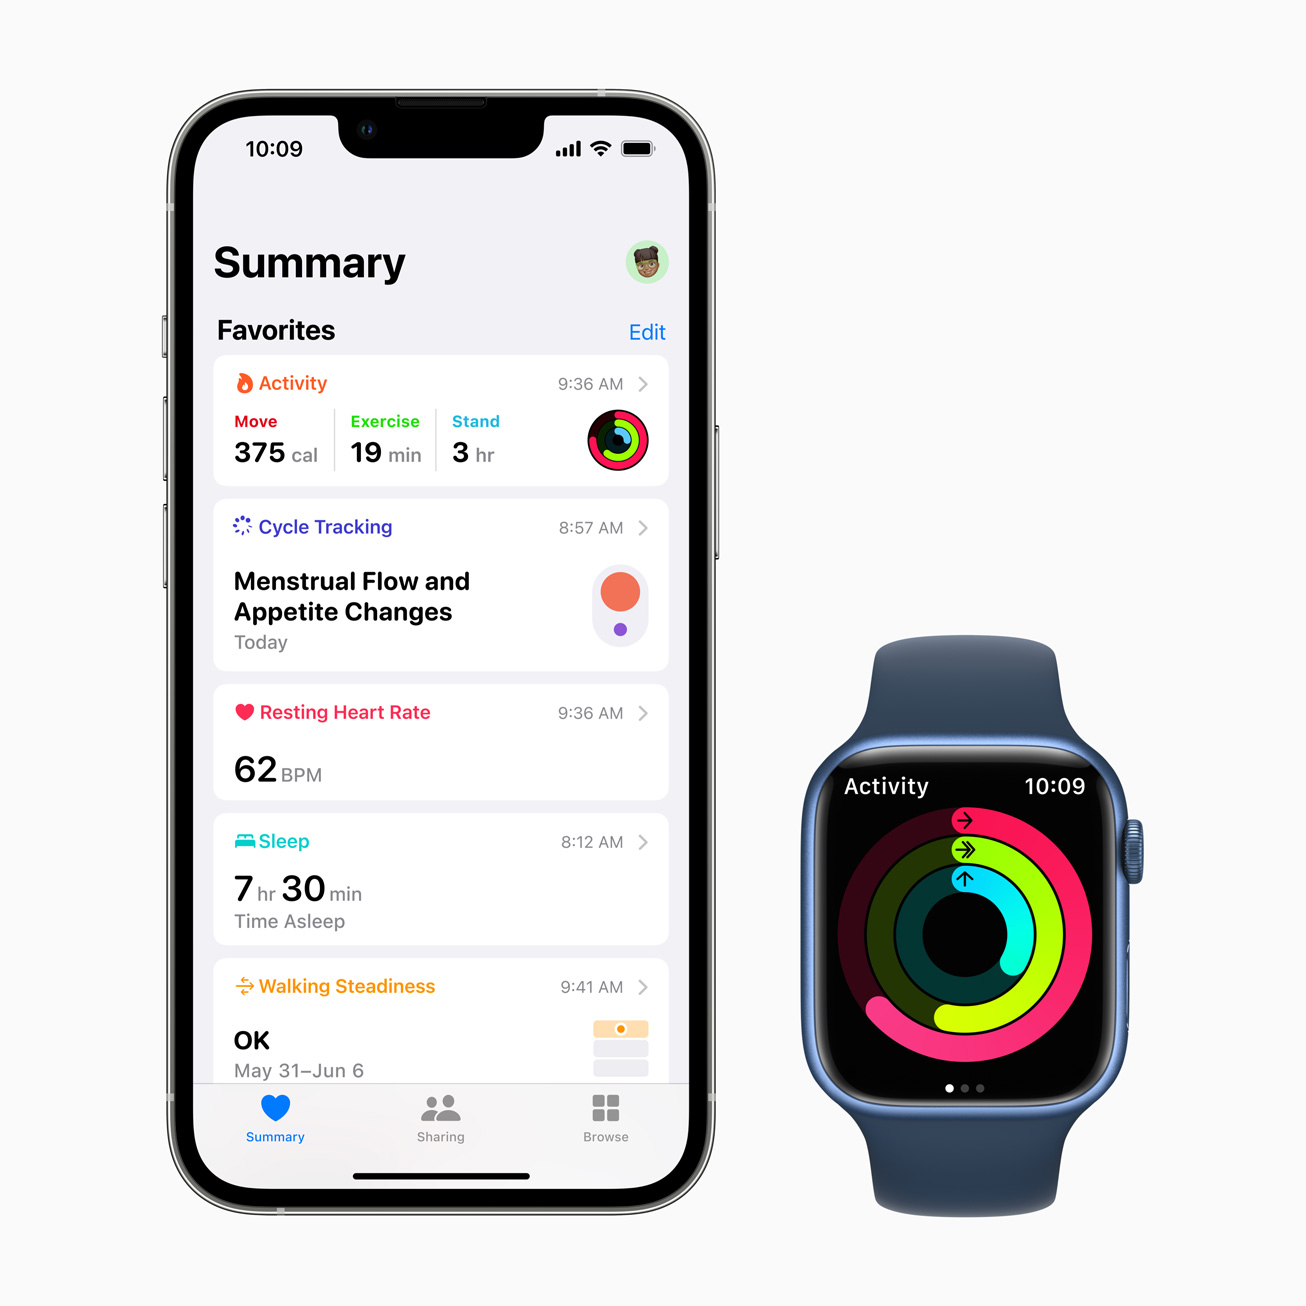 https://images.frandroid.com/wp-content/uploads/2022/07/health-app-and-apple-watch.jpg